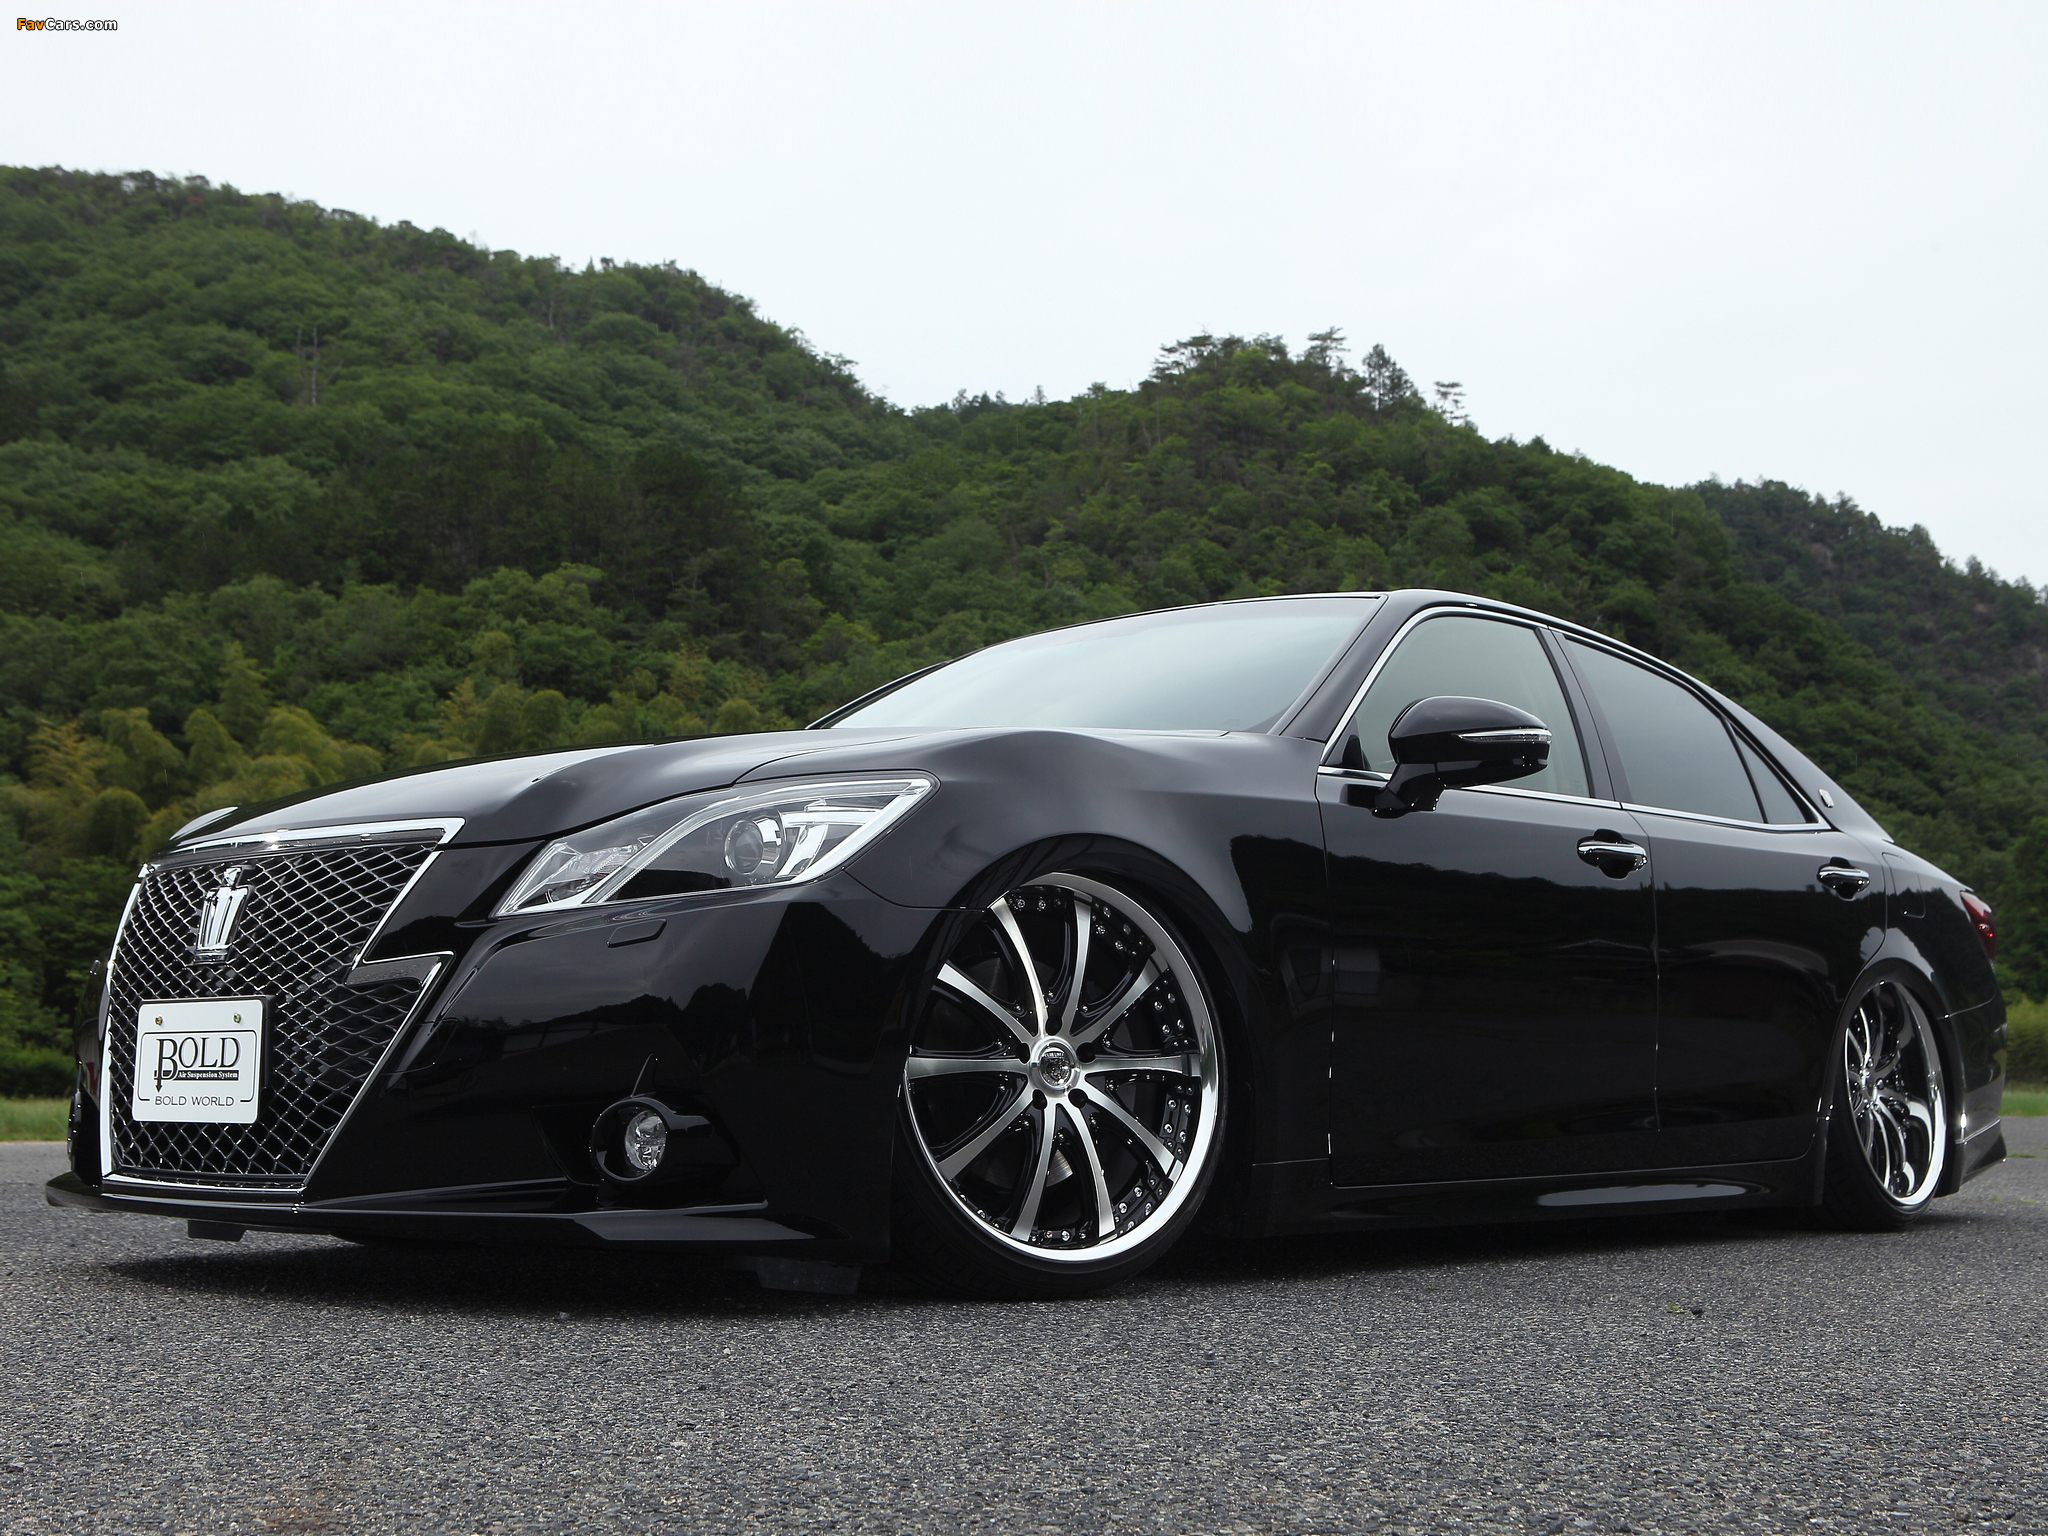 Bold World Toyota Crown Athlete (S210) 2012 pictures (2048 x 1536)